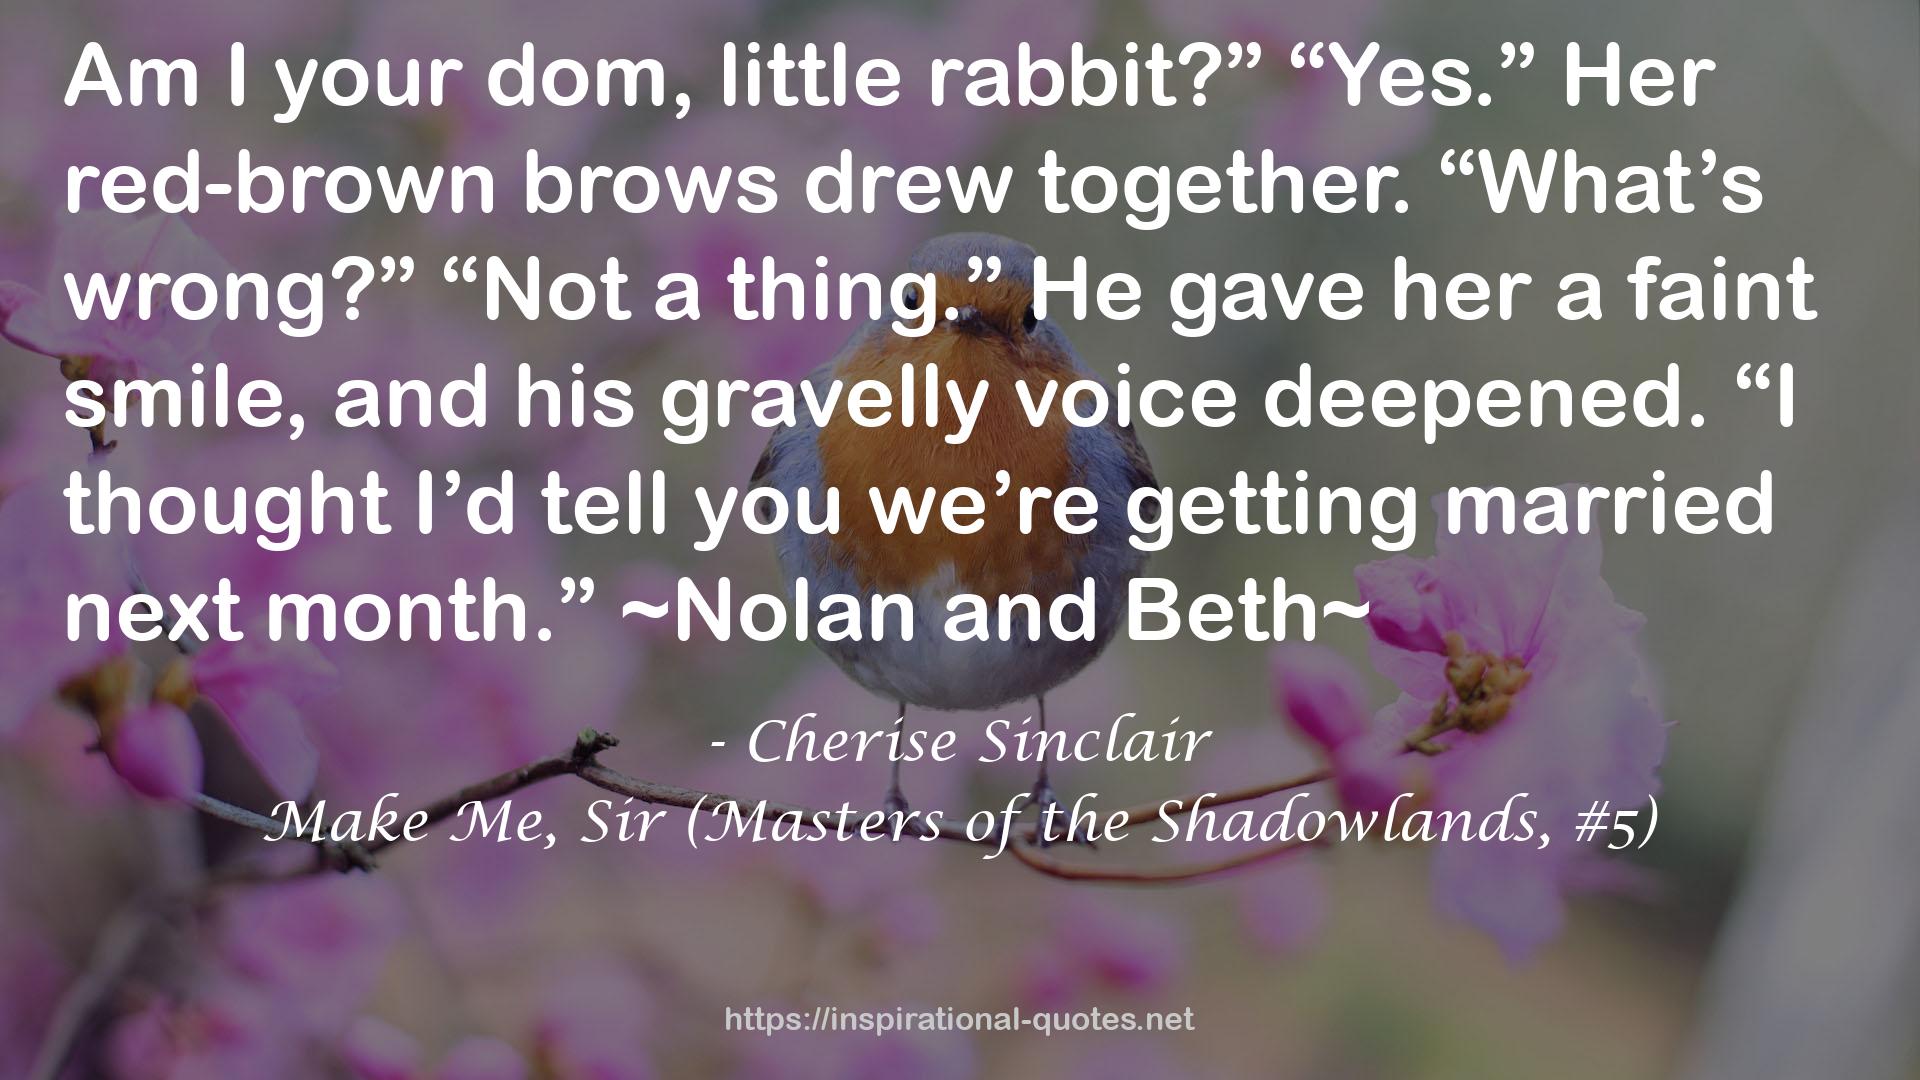 Make Me, Sir (Masters of the Shadowlands, #5) QUOTES